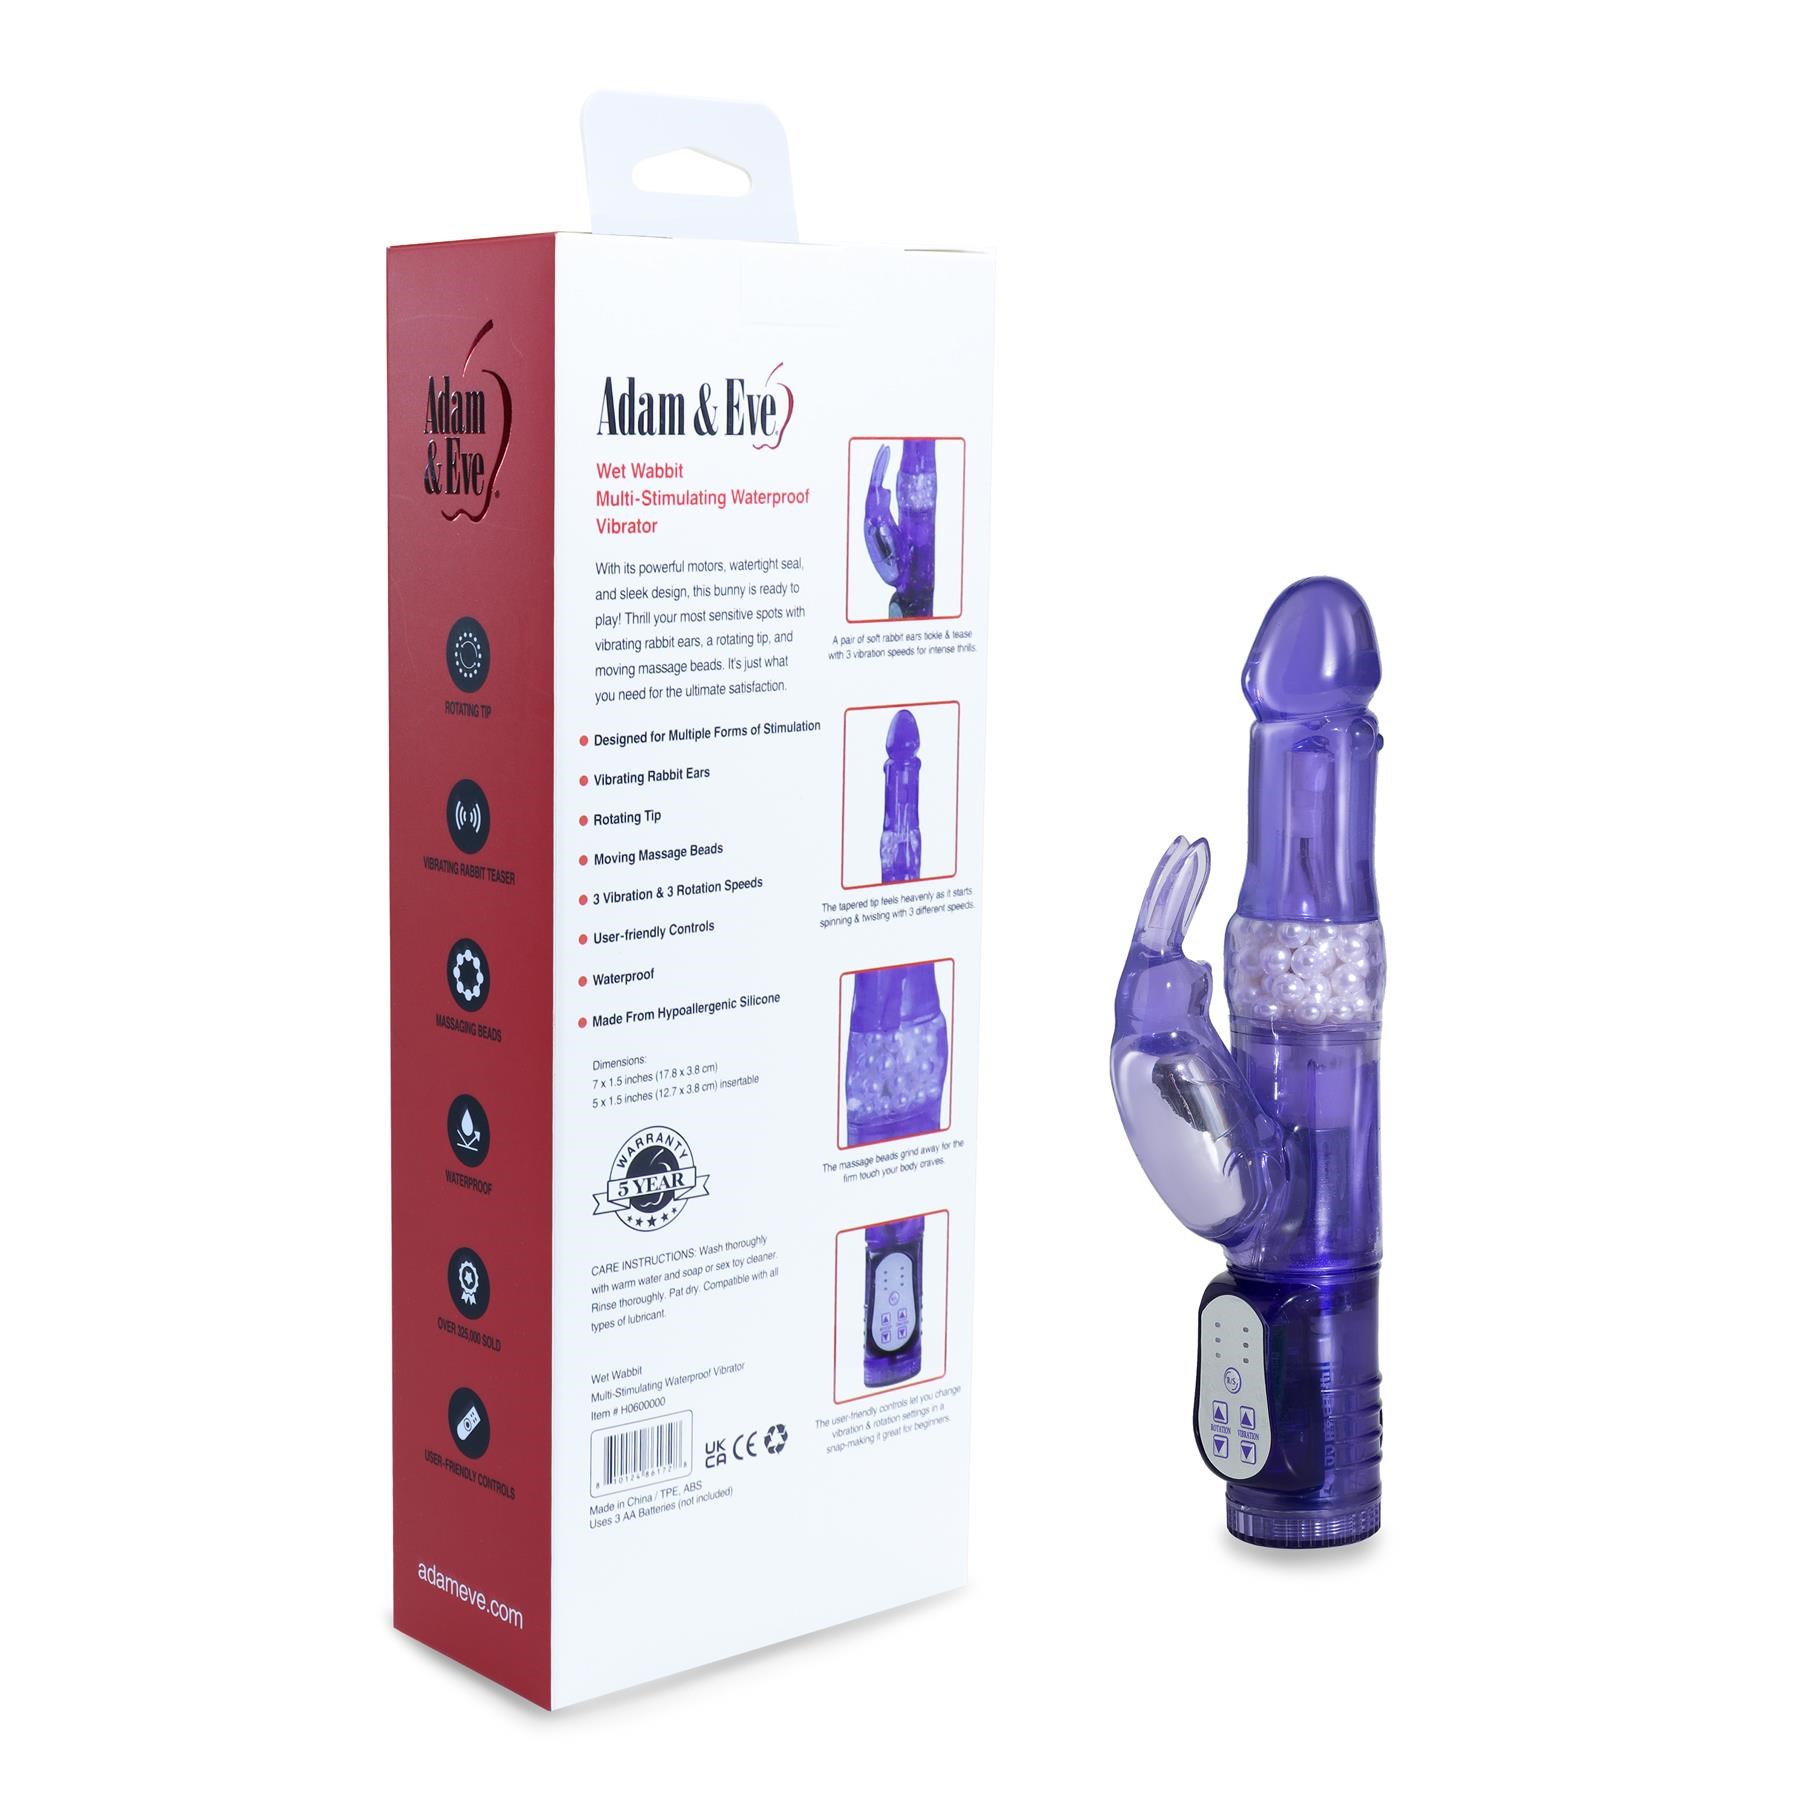 Wet Rabbit Vibrator - Product and Back of Packaging